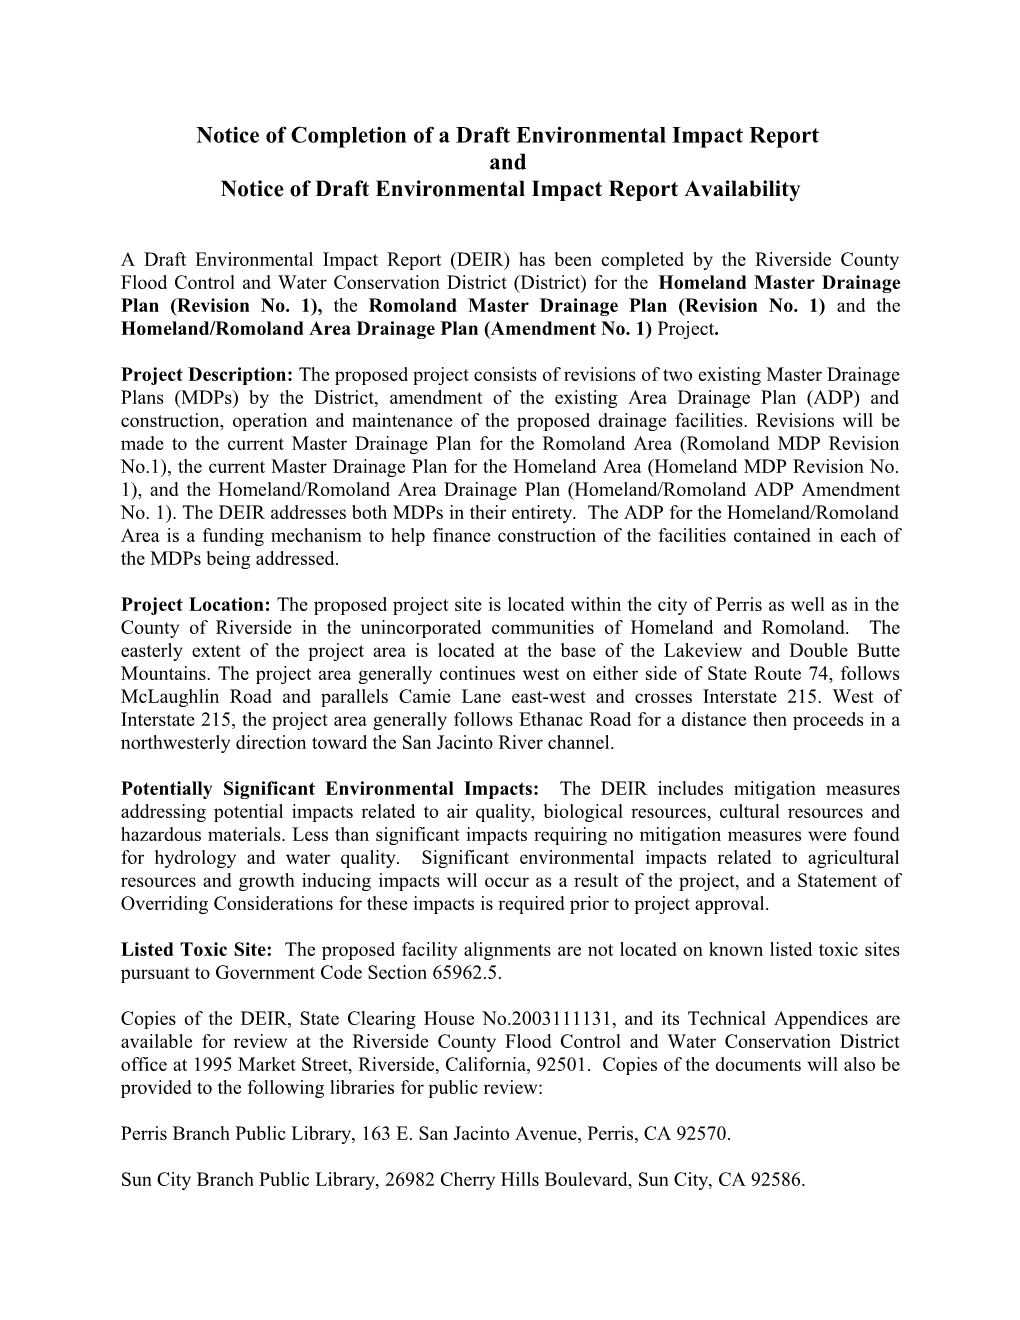 Notice of Completion of a Draft Environmental Impact Report and Notice of Draft Environmental